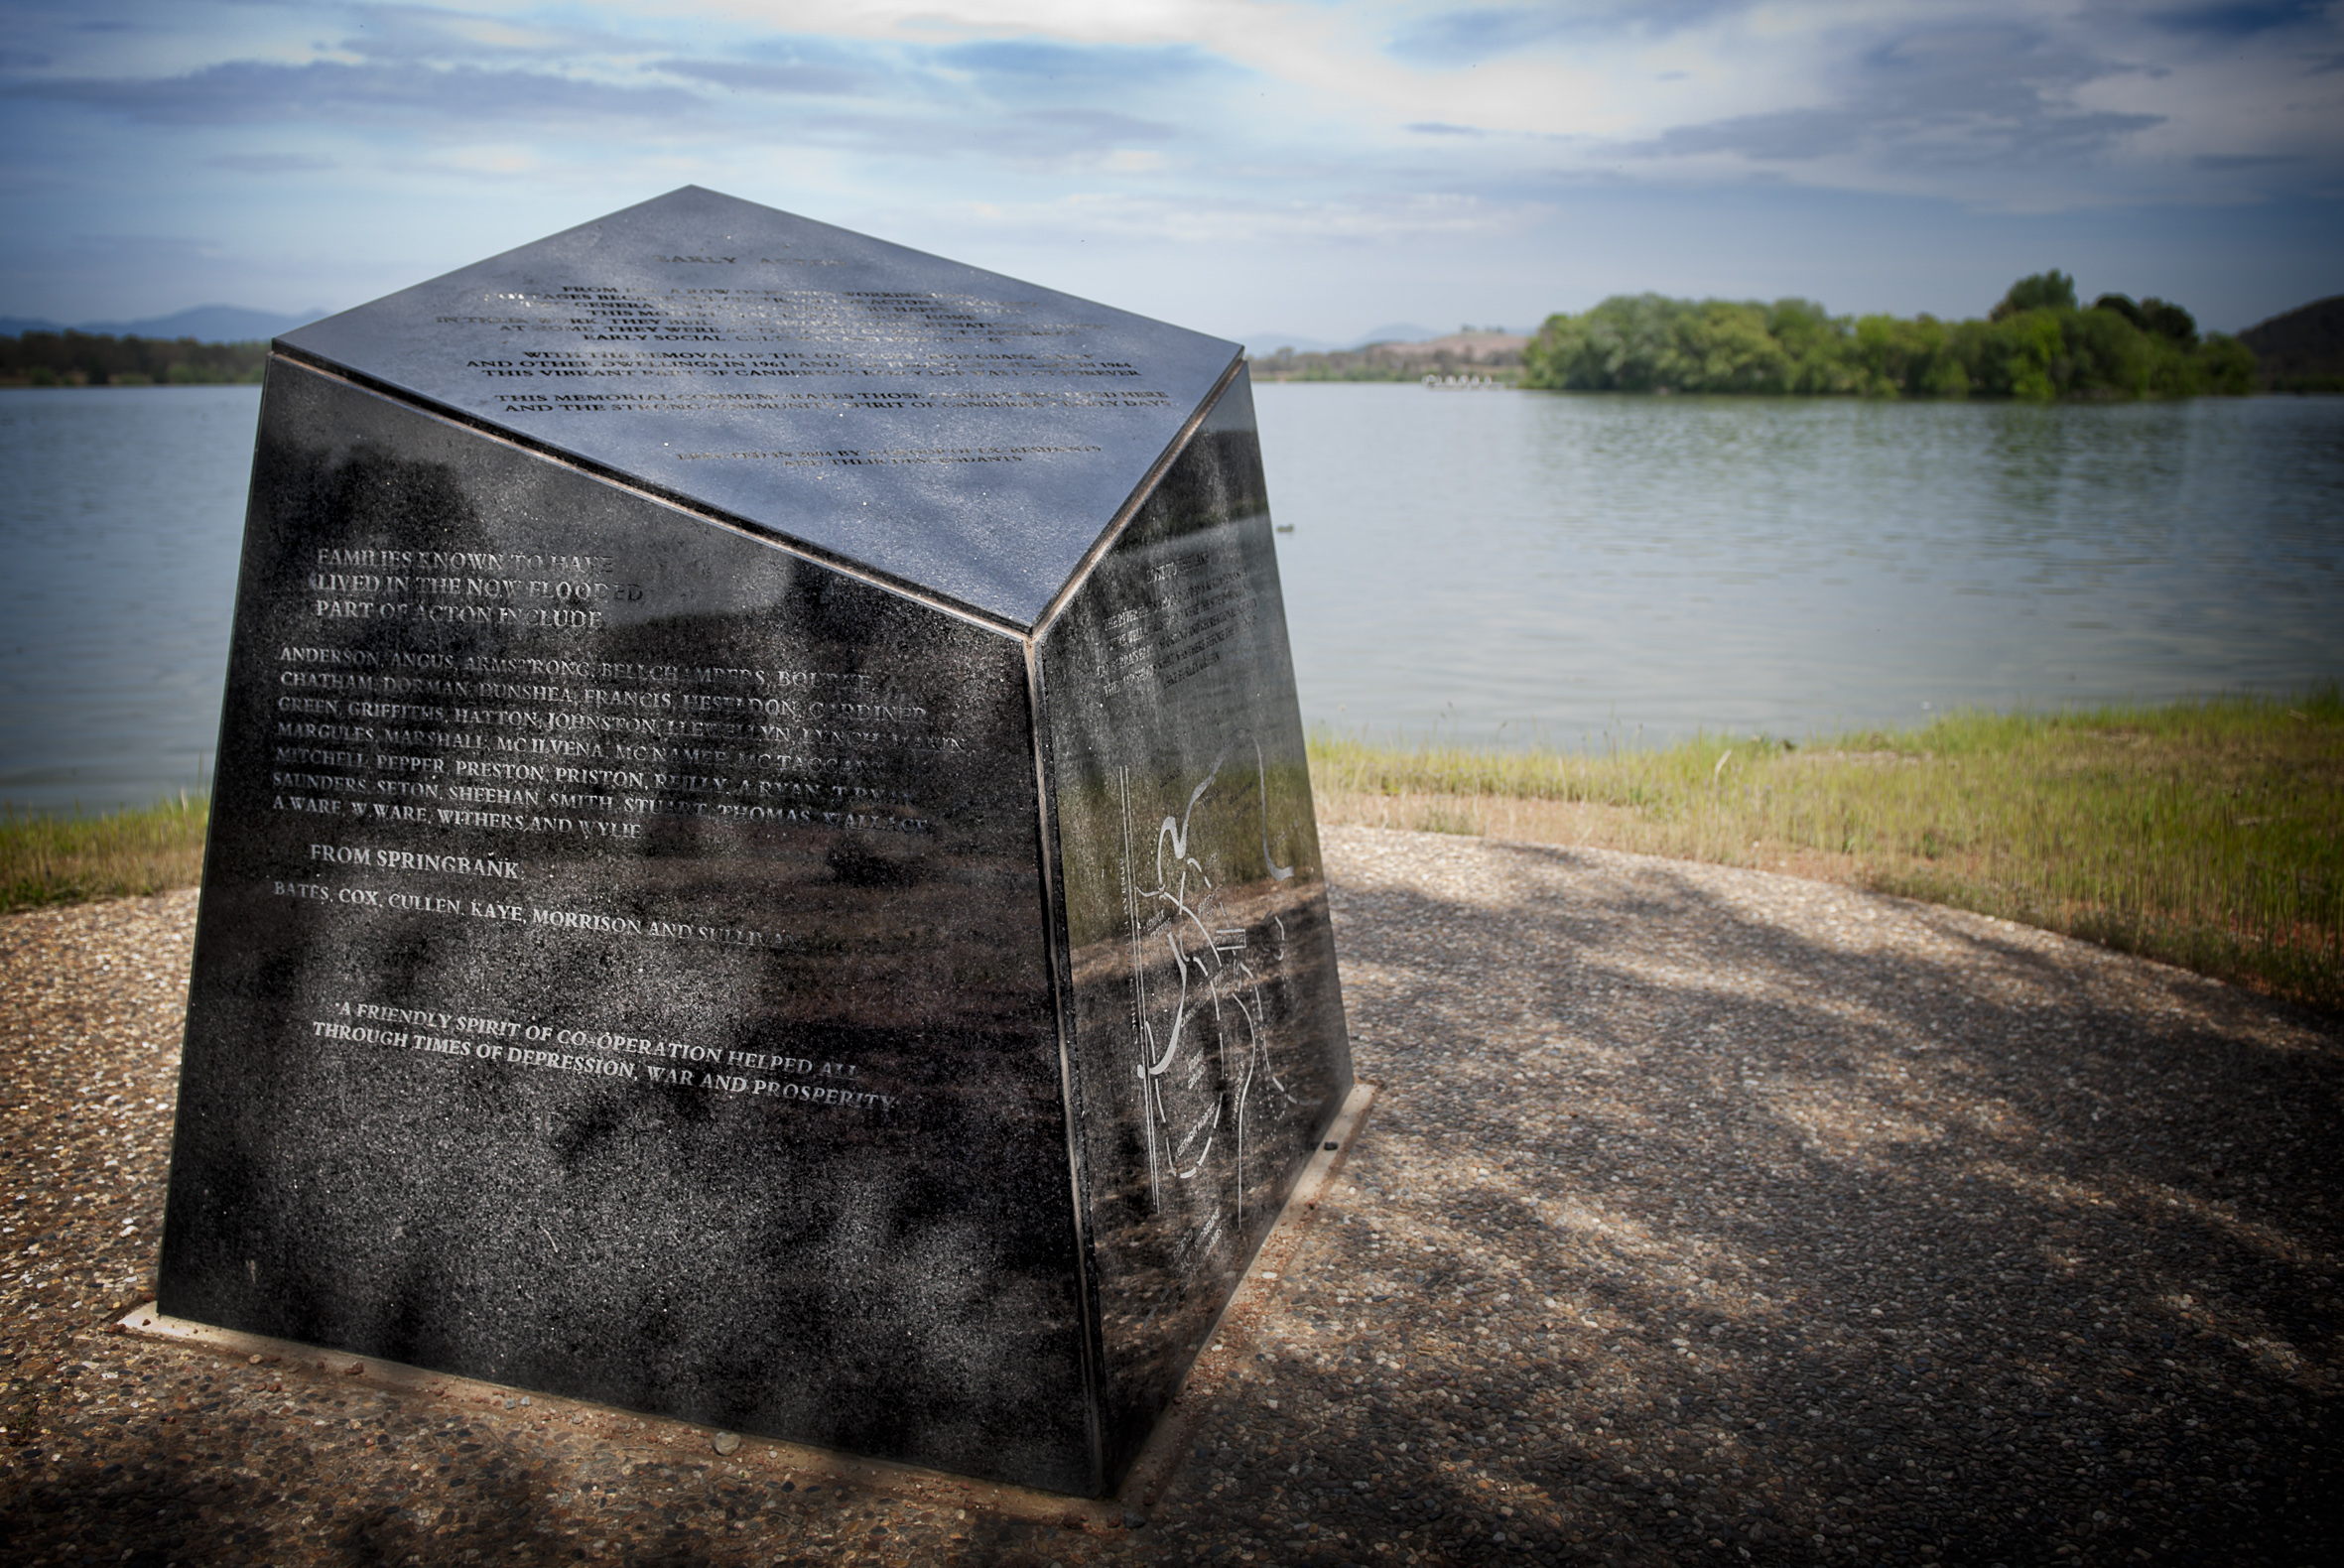 Photo of the Memorial by the lake